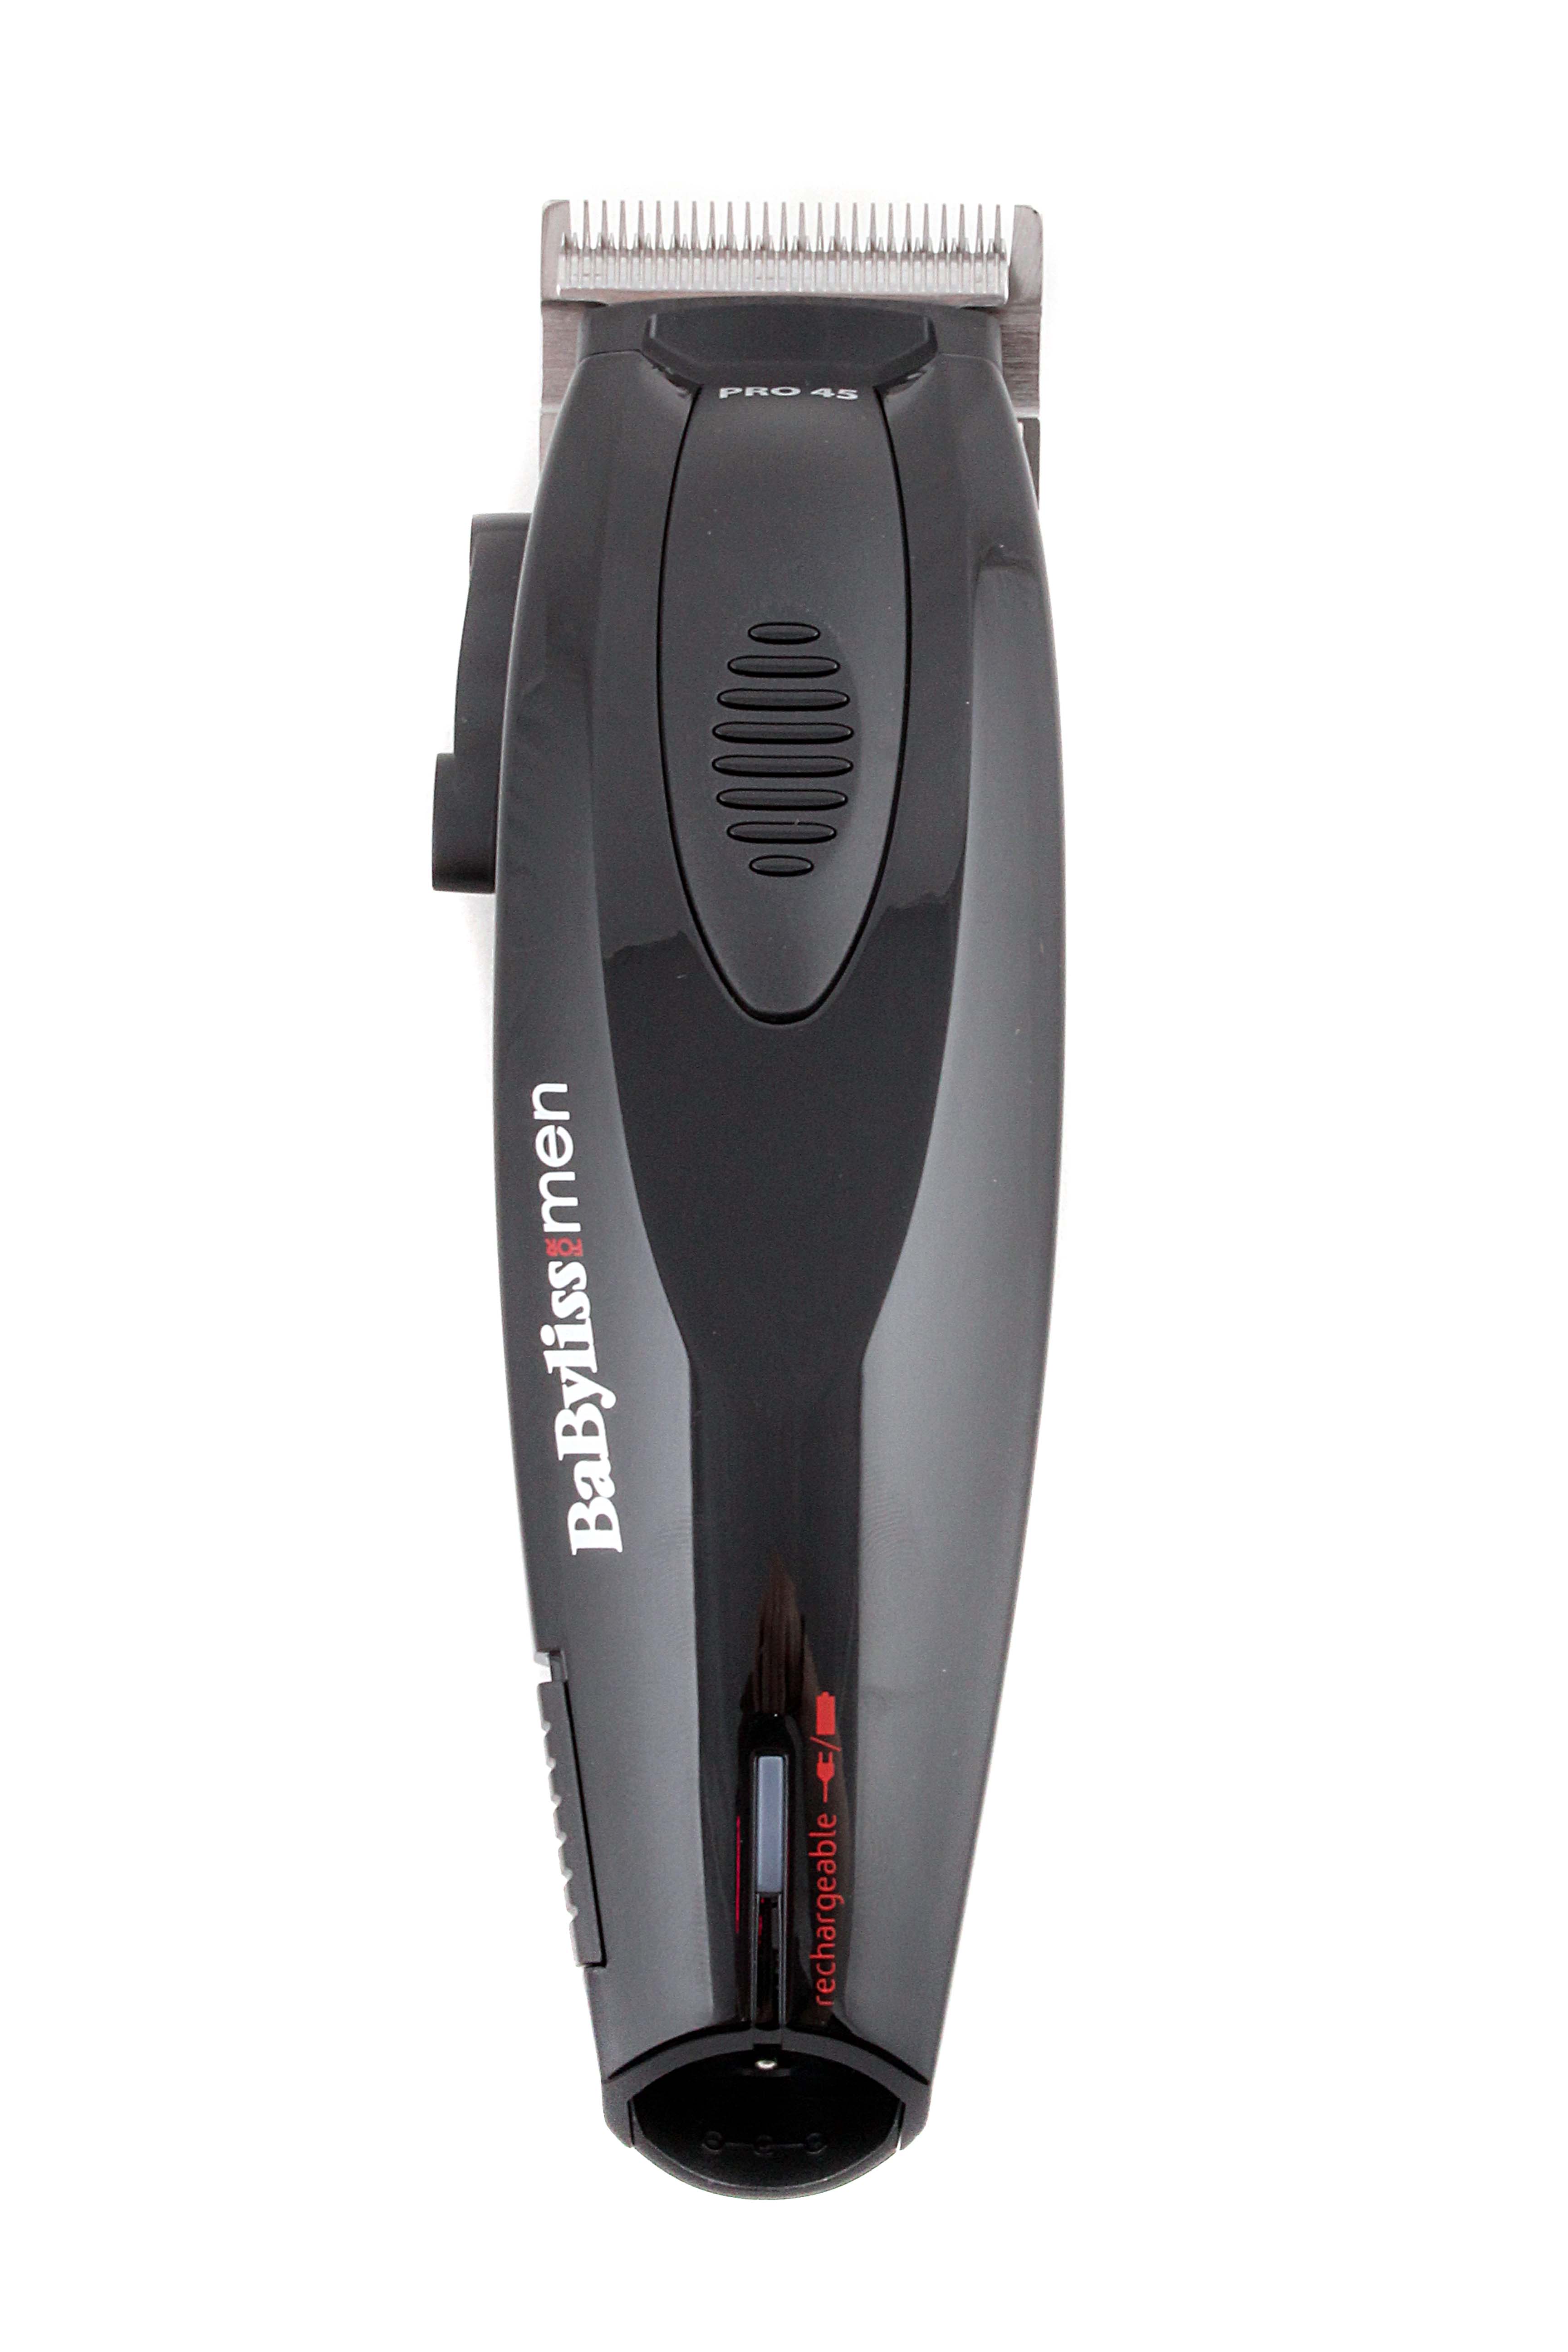    Babyliss - Babyliss  : 30 ;  : 8 ;   : 45 ;  : 8 <br>